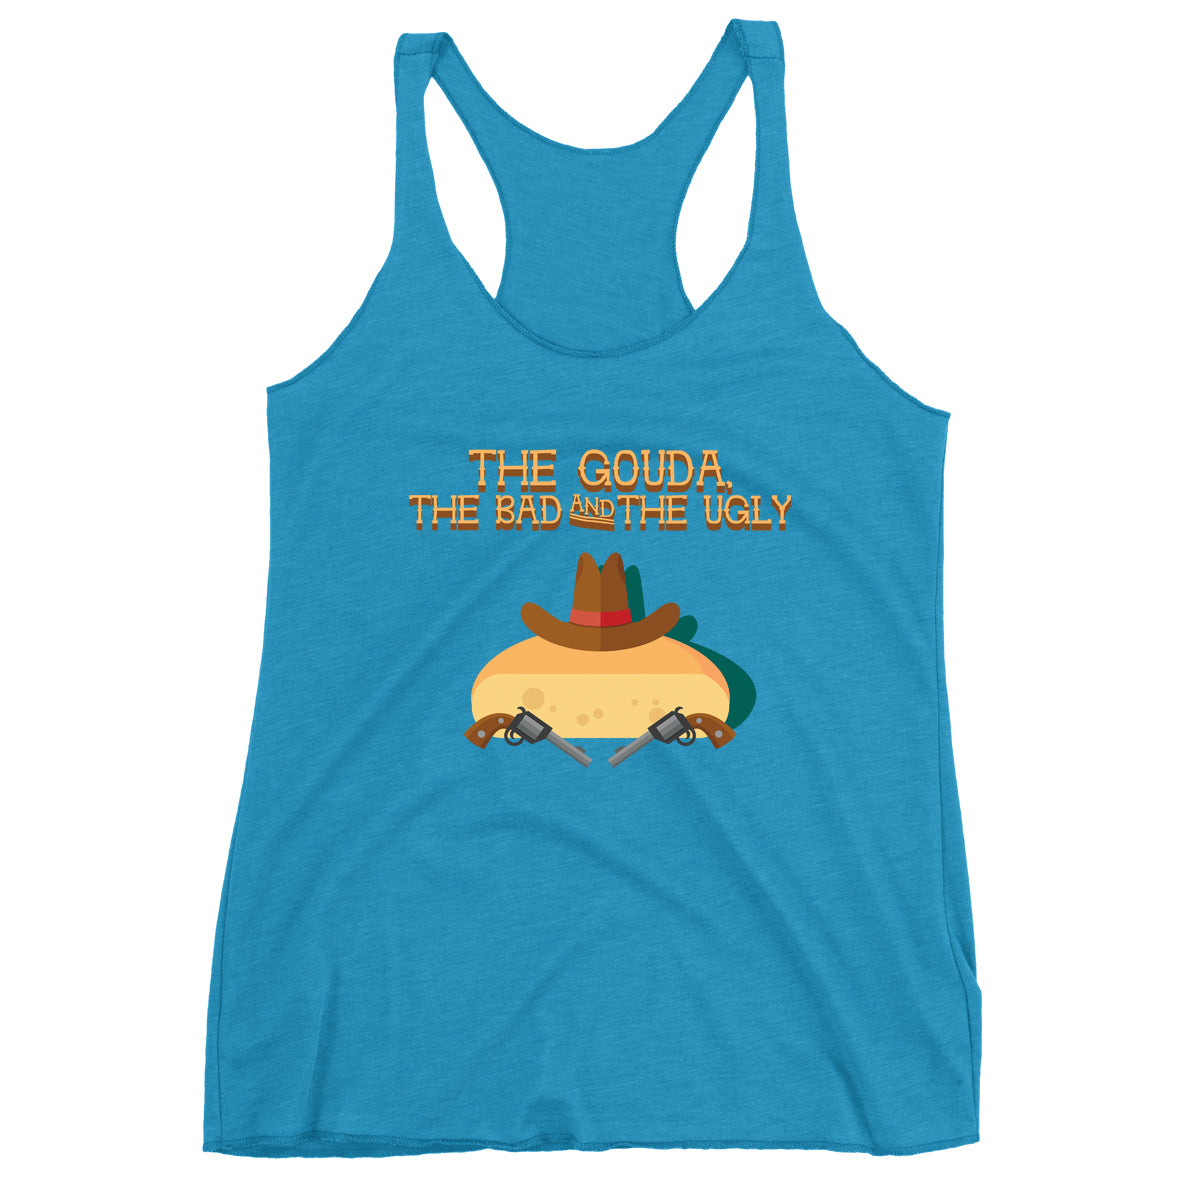 Movie The Food - The Gouda, The Bad, The Ugly Women's Racerback Tank Top - Vintage Turquoise